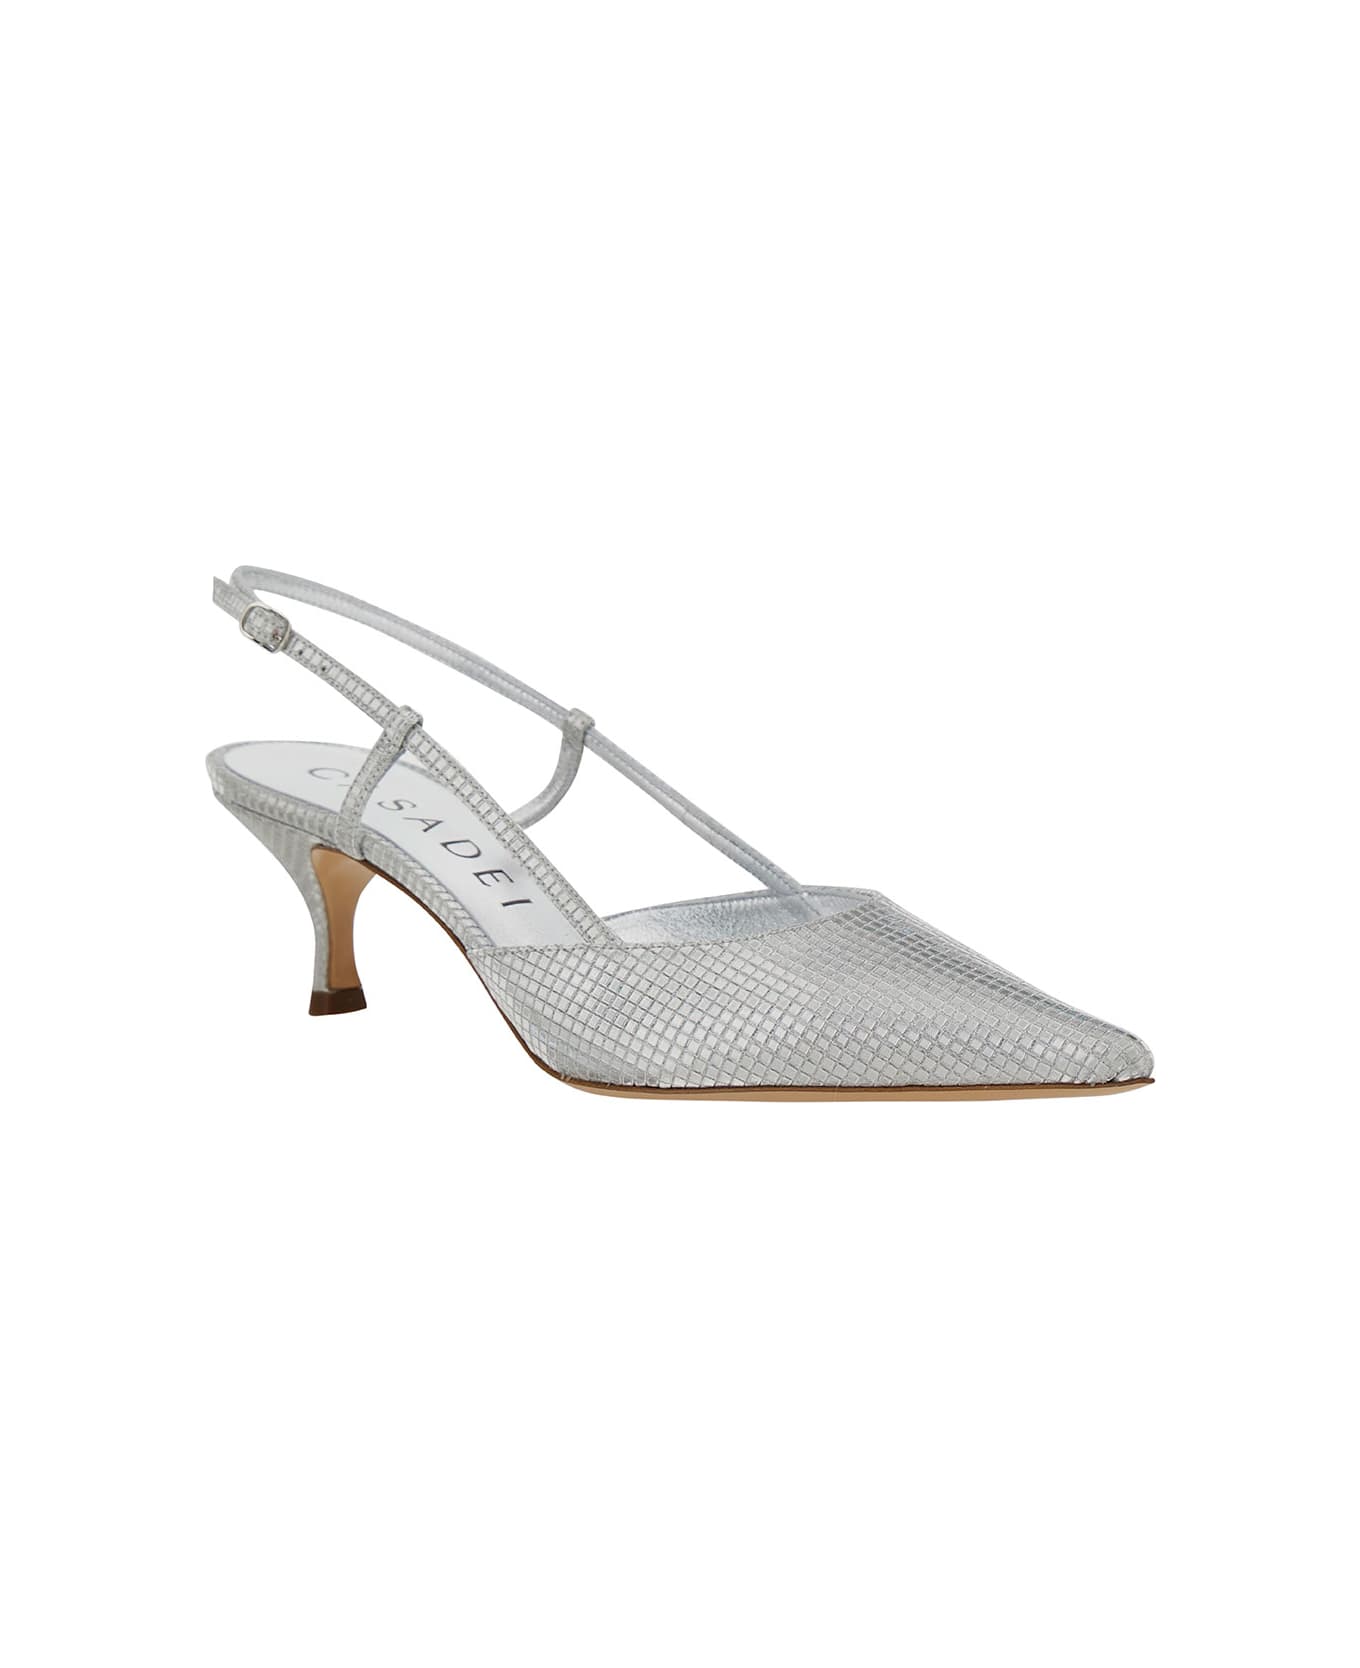 Casadei Silver Slingback Pumps With Kitten Heel In Reflective Metallic Fabric Woman - SILVER